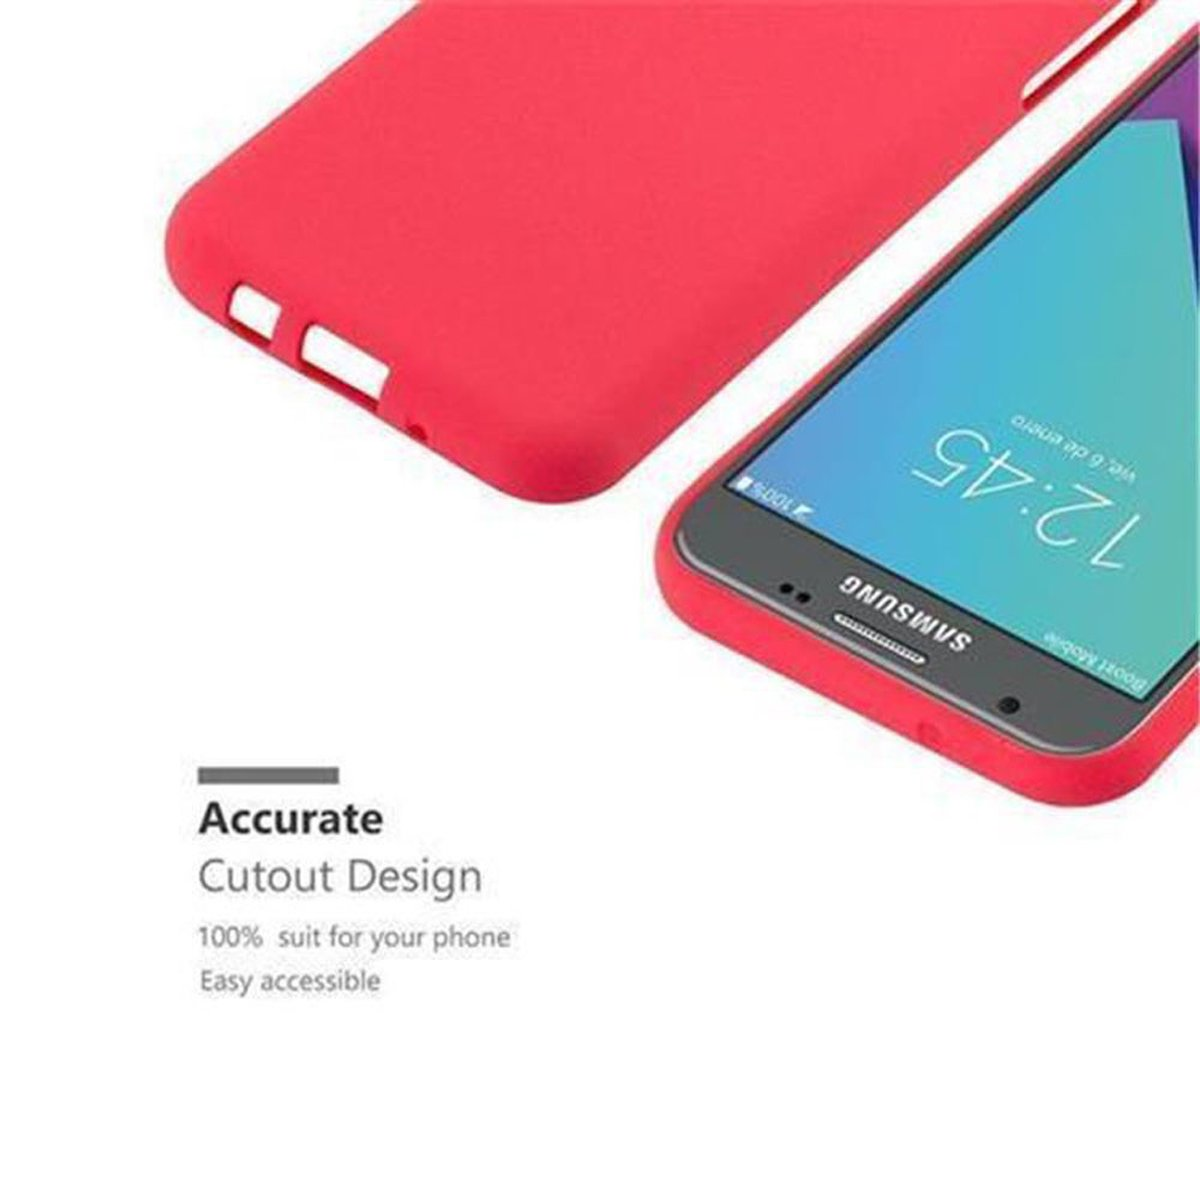 Backcover, CADORABO Version, Frosted TPU US J3 Galaxy Schutzhülle, ROT FROST 2017 Samsung,